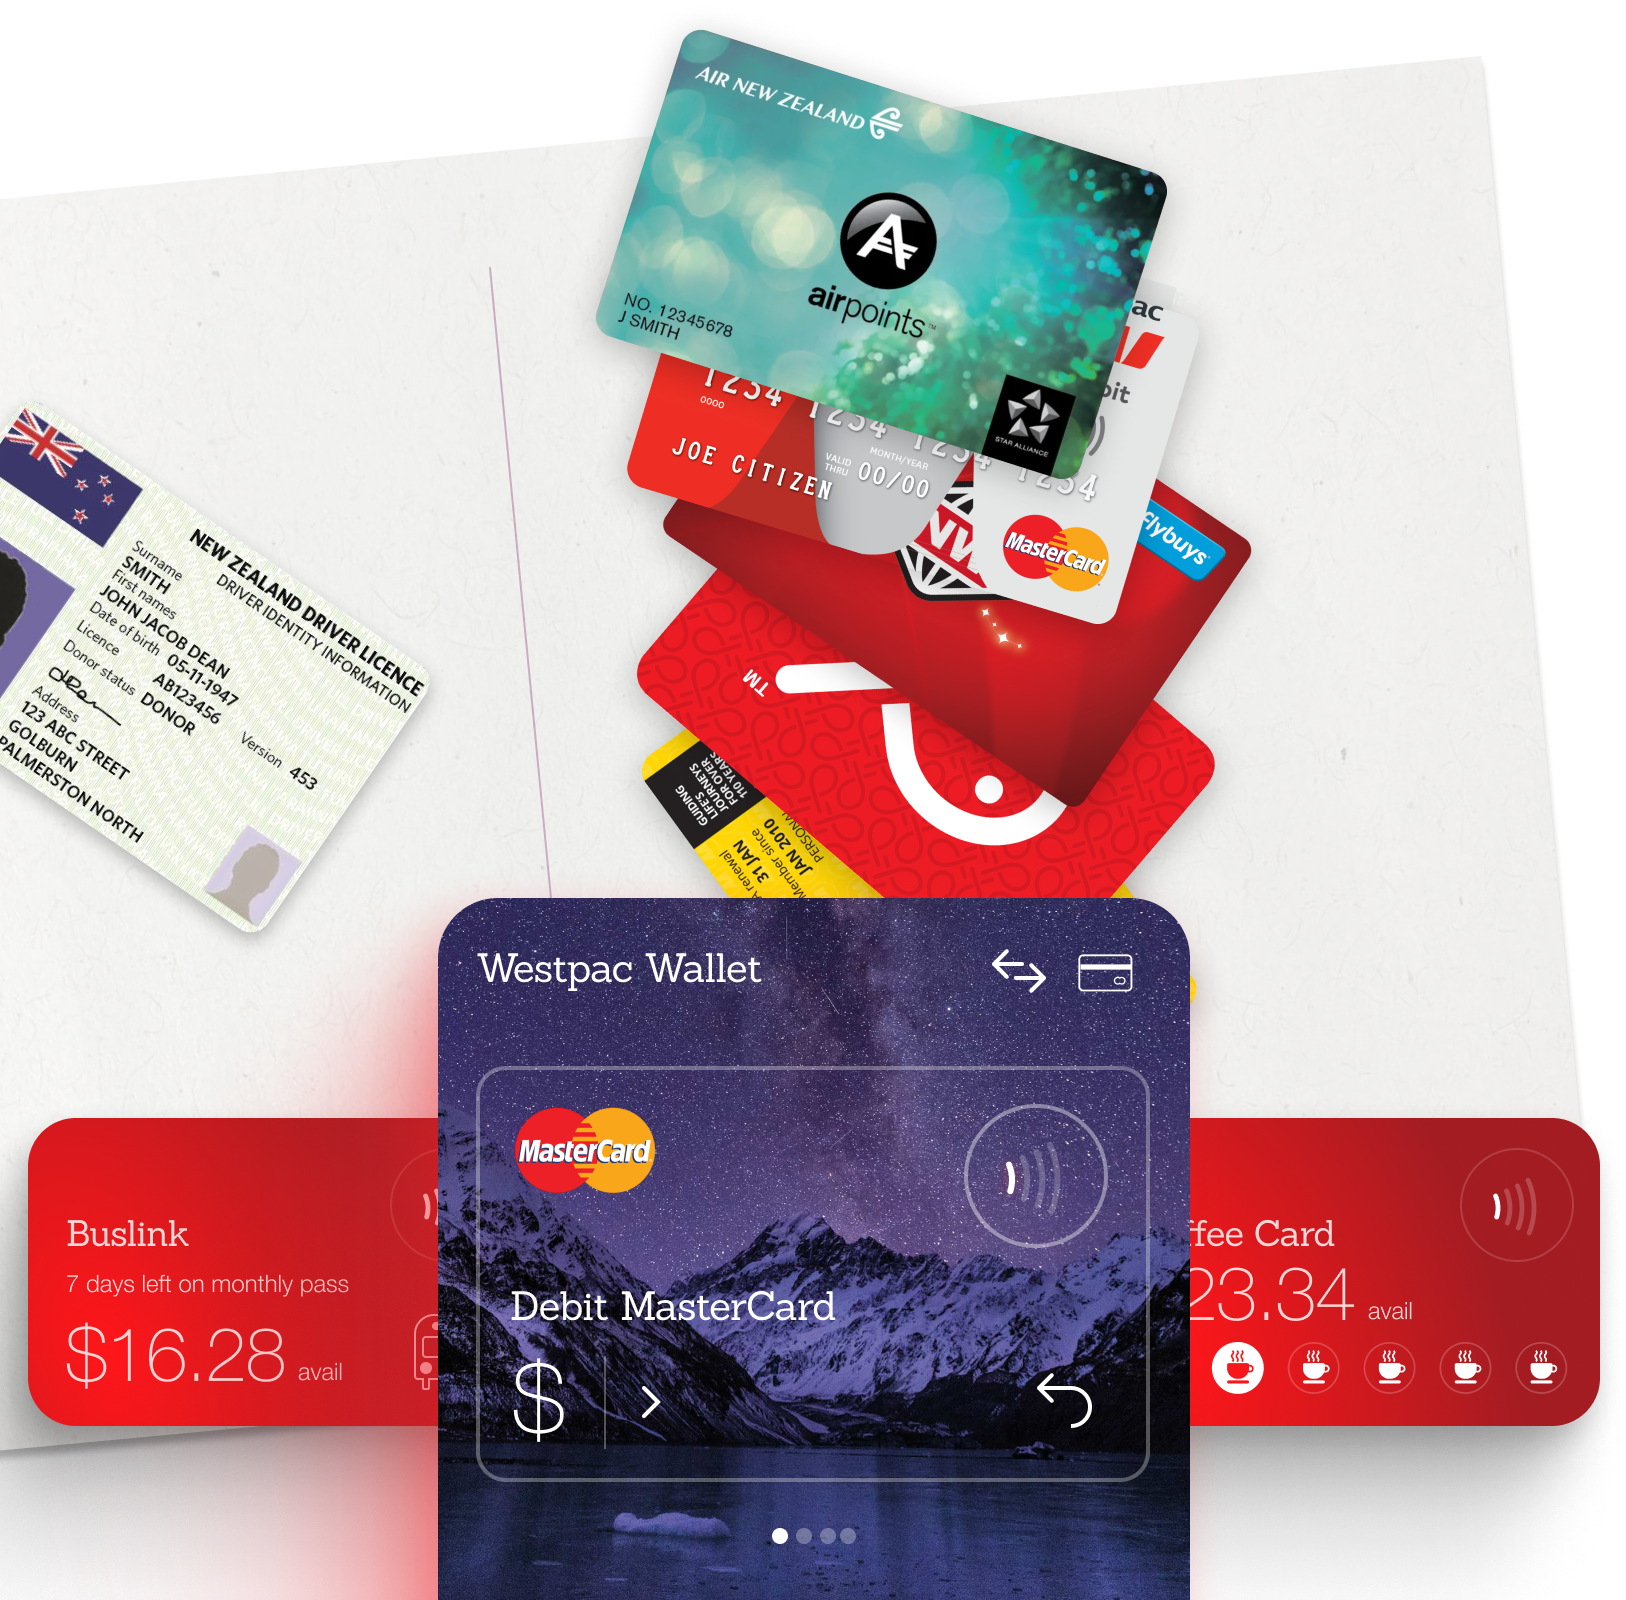 Westpac Wallet app with a scattered pile of cards including Airports, New World Club card and a Drivers licence separated on a piece of paper.